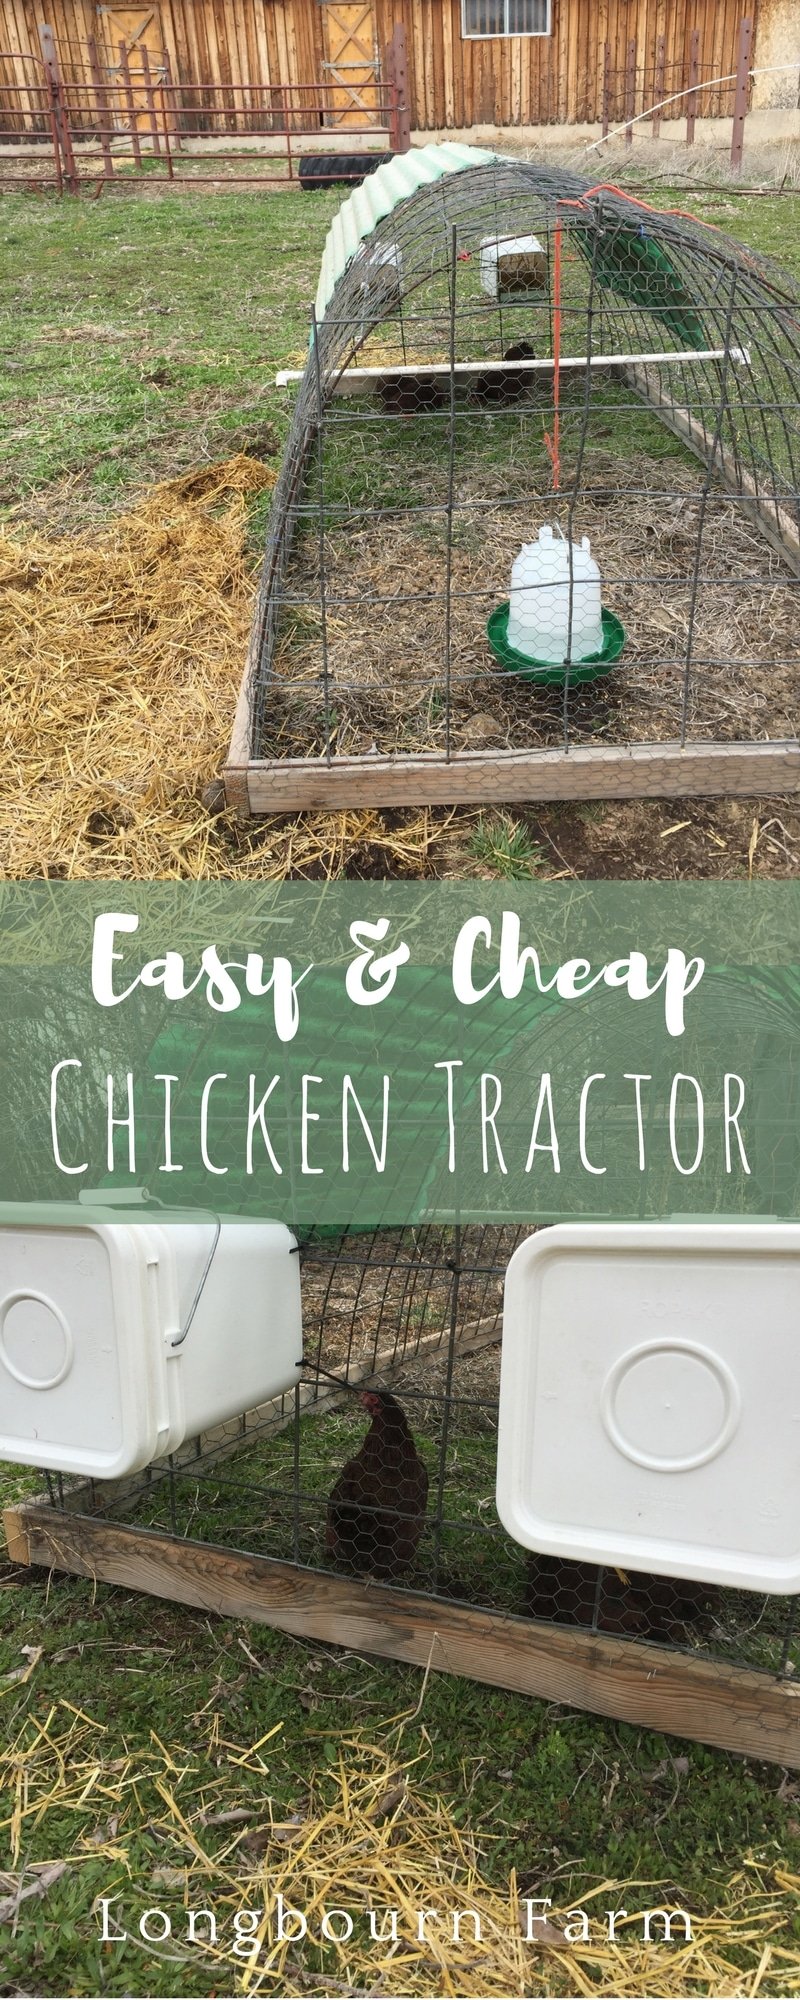 How to build an easy, DIY Chicken Tractor with a simple frame wire outside. Use materials you have easily available to make it cost effective, or free!